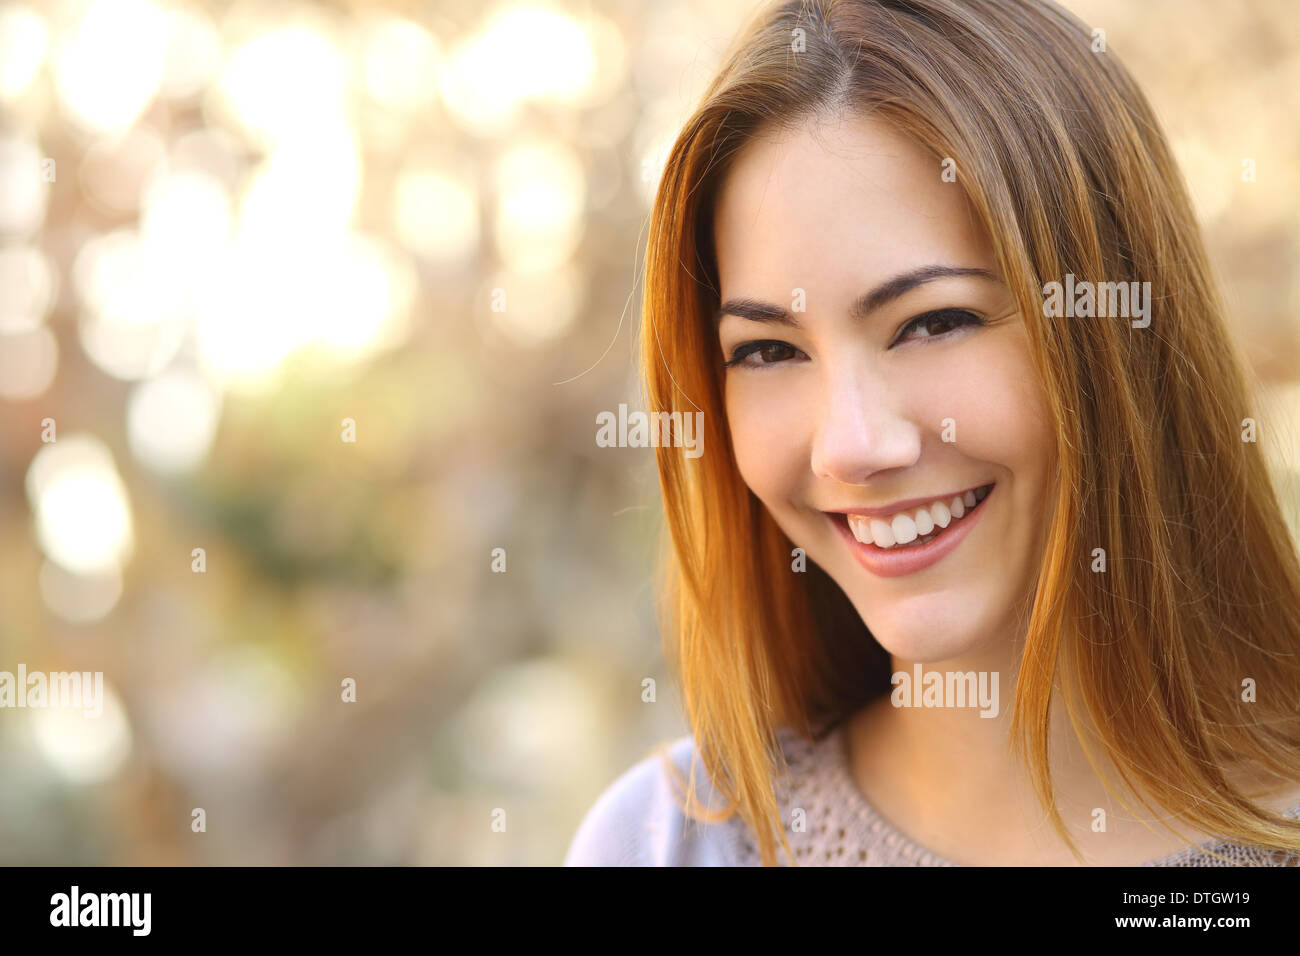 Portrait of a beautiful happy woman with a perfect white smile with a warmth background Stock Photo